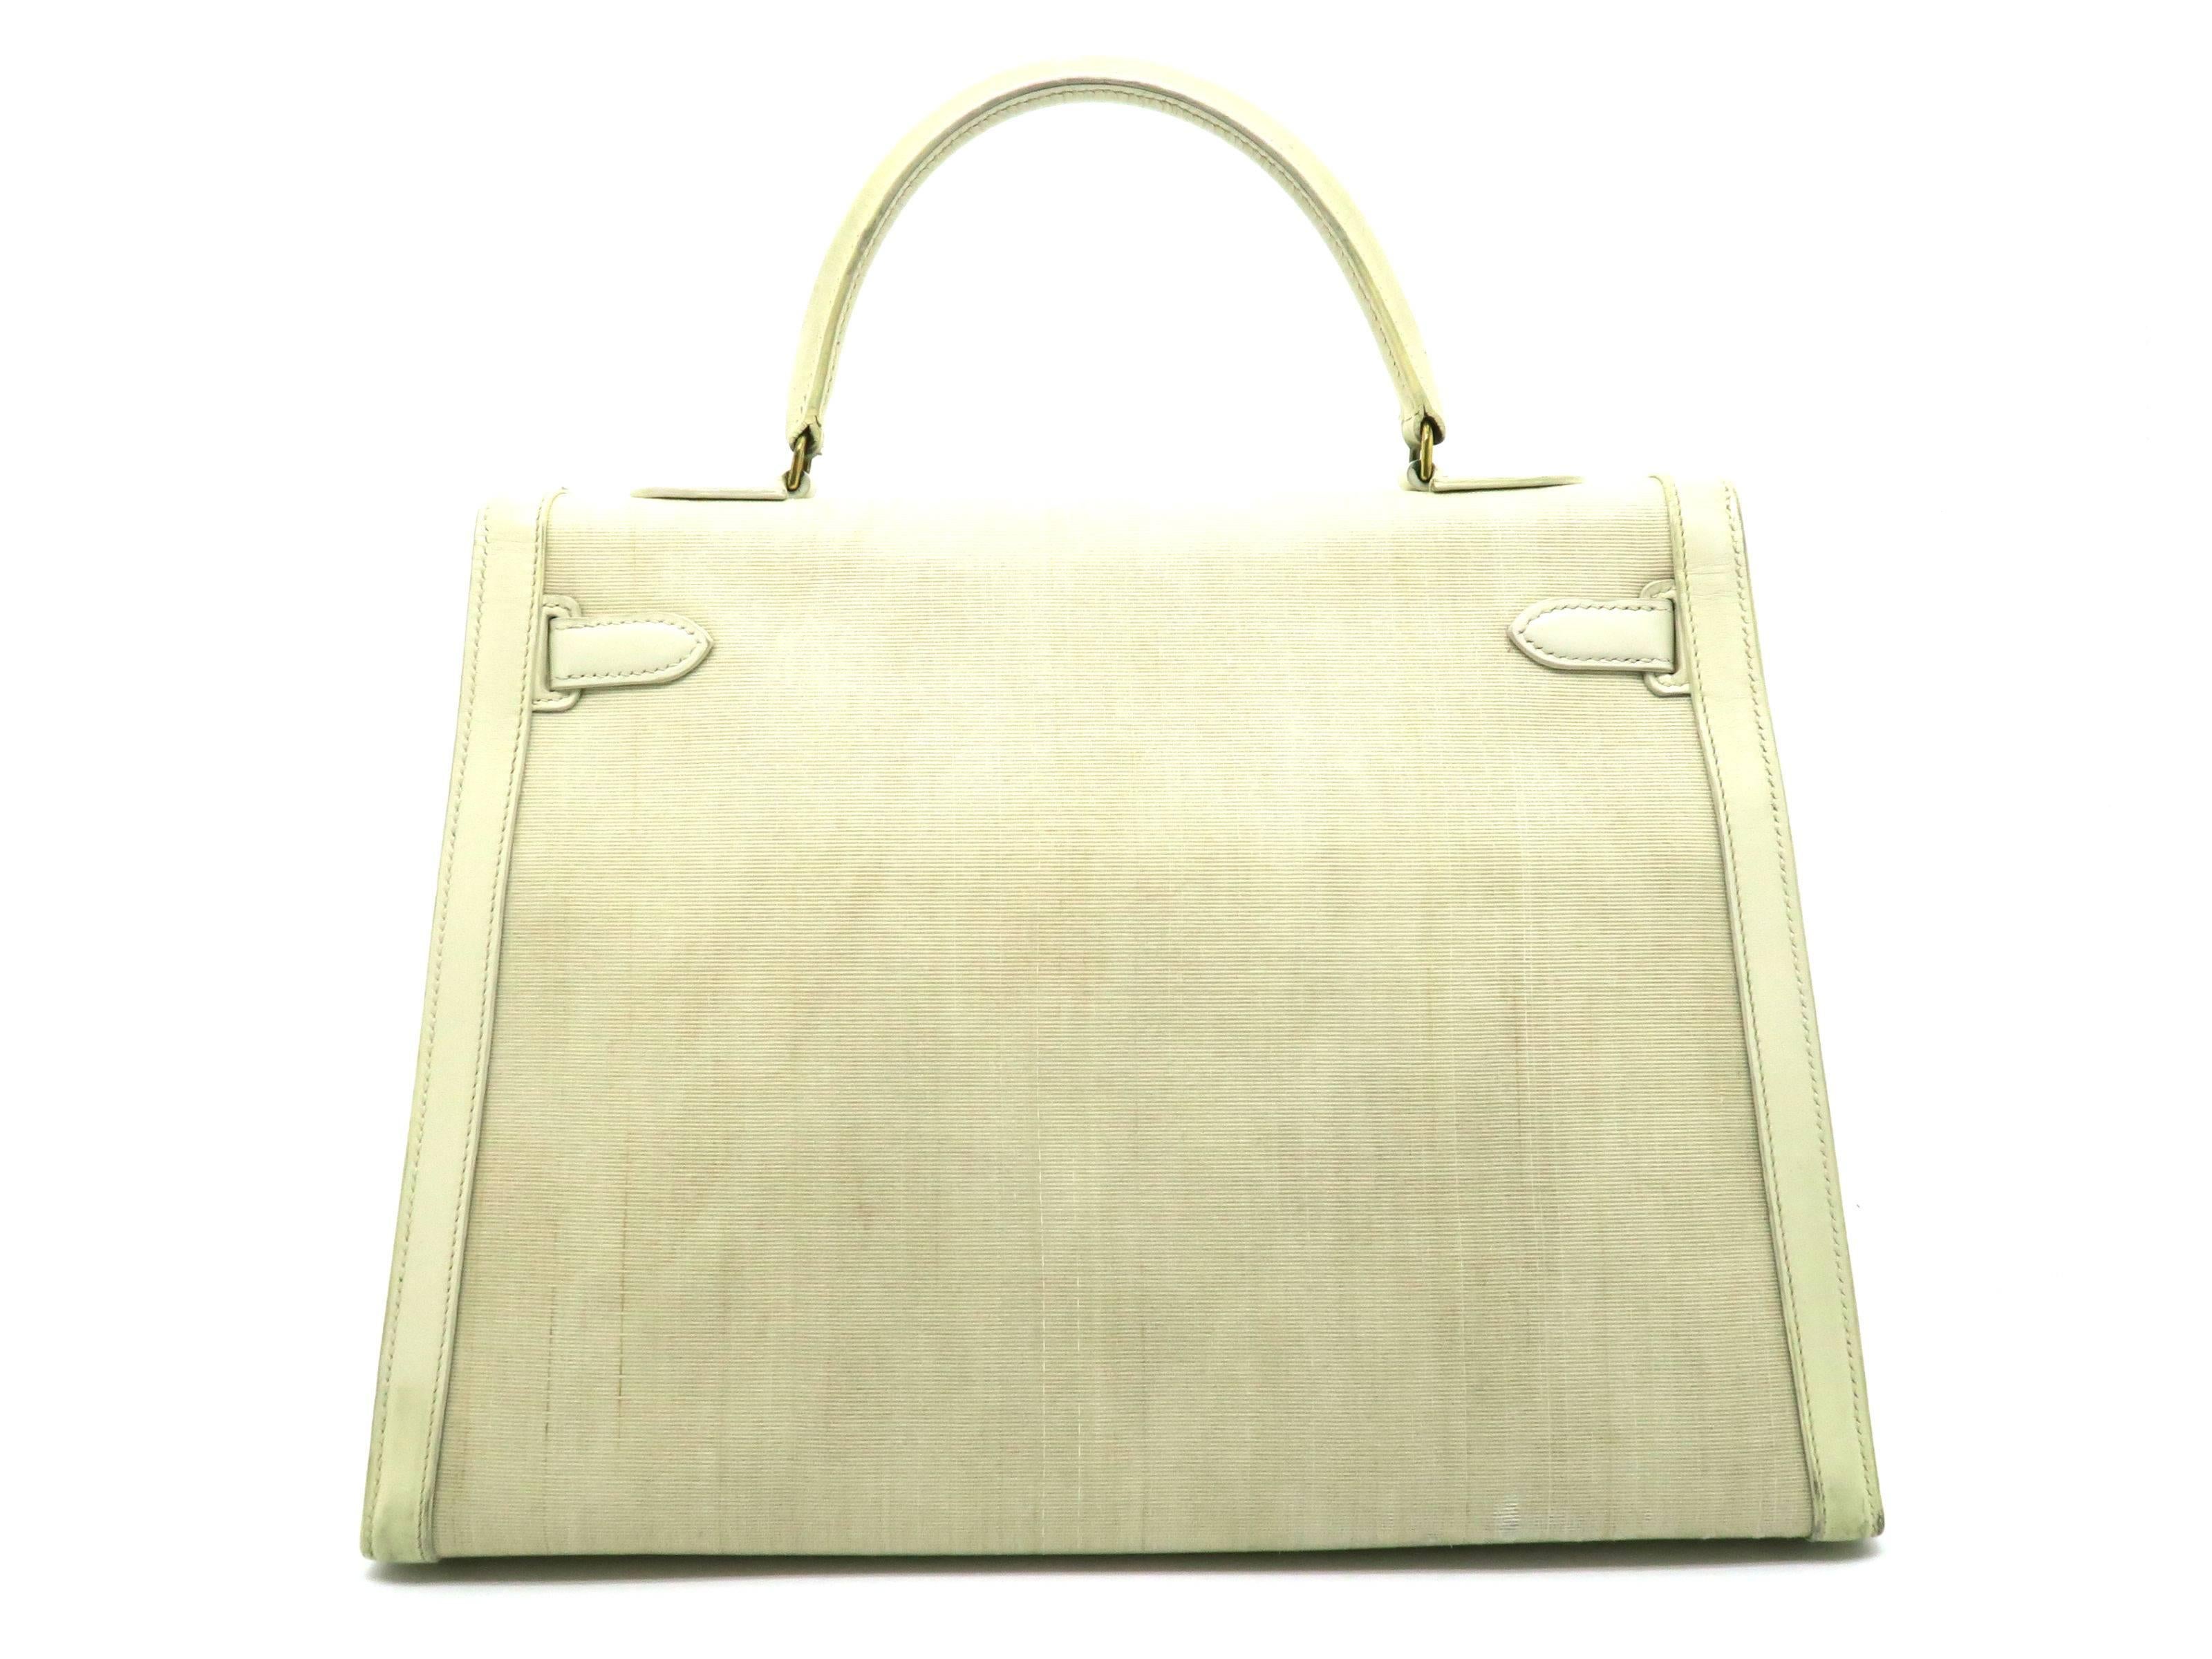 Hermes Kelly 35 Jaune Poussin Beige Box Calf Leather and Canvas Top Handle Bag In Fair Condition For Sale In Kowloon, HK